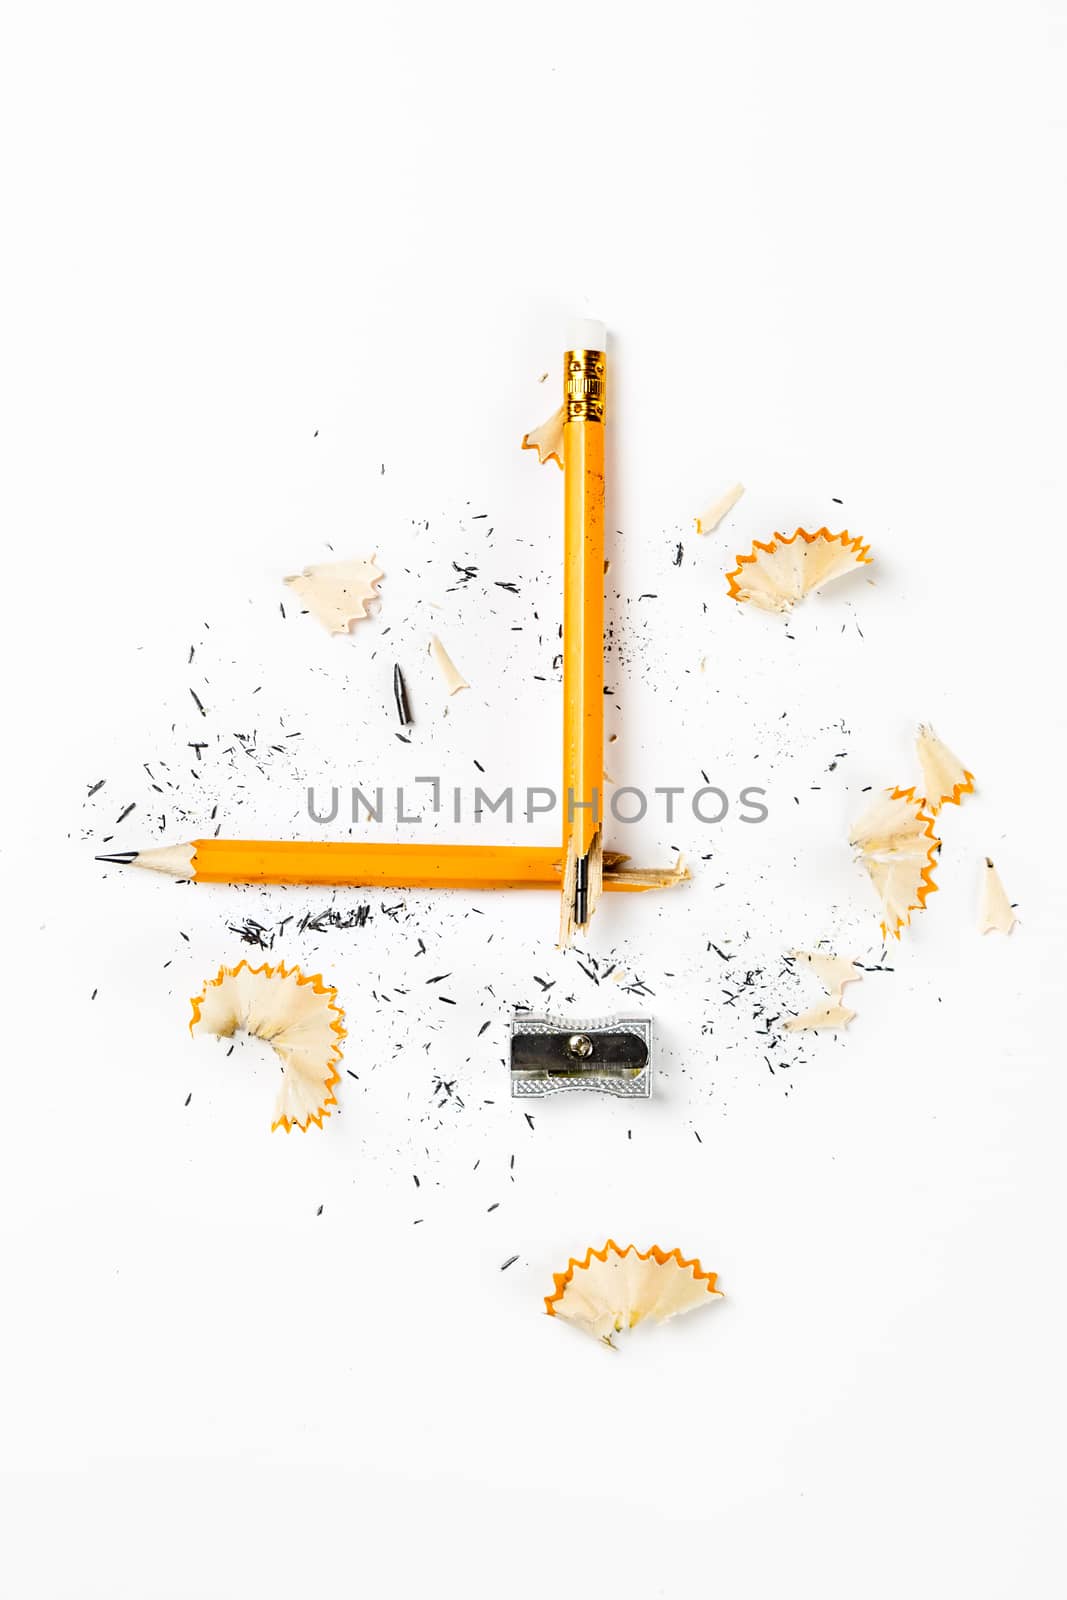 Pencil, metal sharpener and pencil shavings on white background. Vertical image.